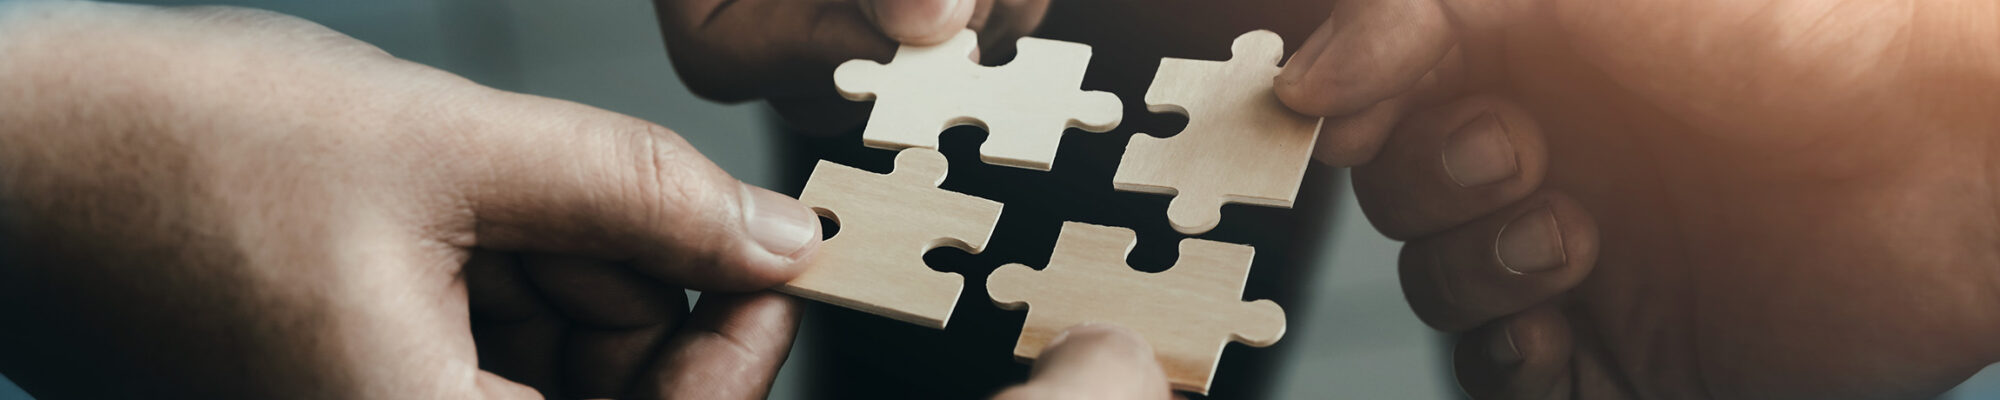 mobile jigsaw puzzle pieces business cooperation concept teamwork and cooperation Businessmen join a jigsaw team, charity, volunteerism, unity, teamwork.